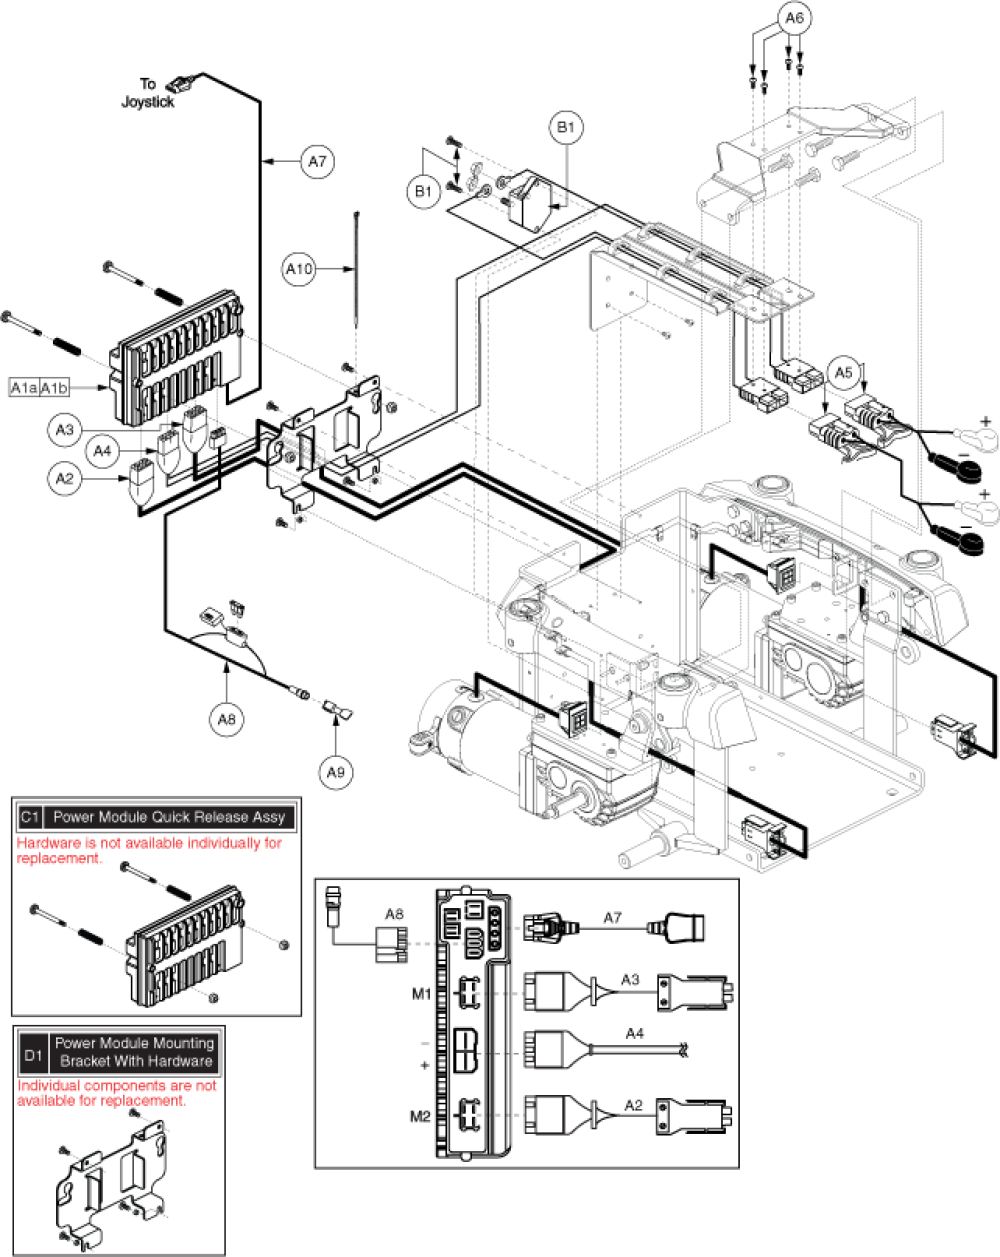 Electronics Assembly - Vr2, H2 Motor, Future Actuator parts diagram